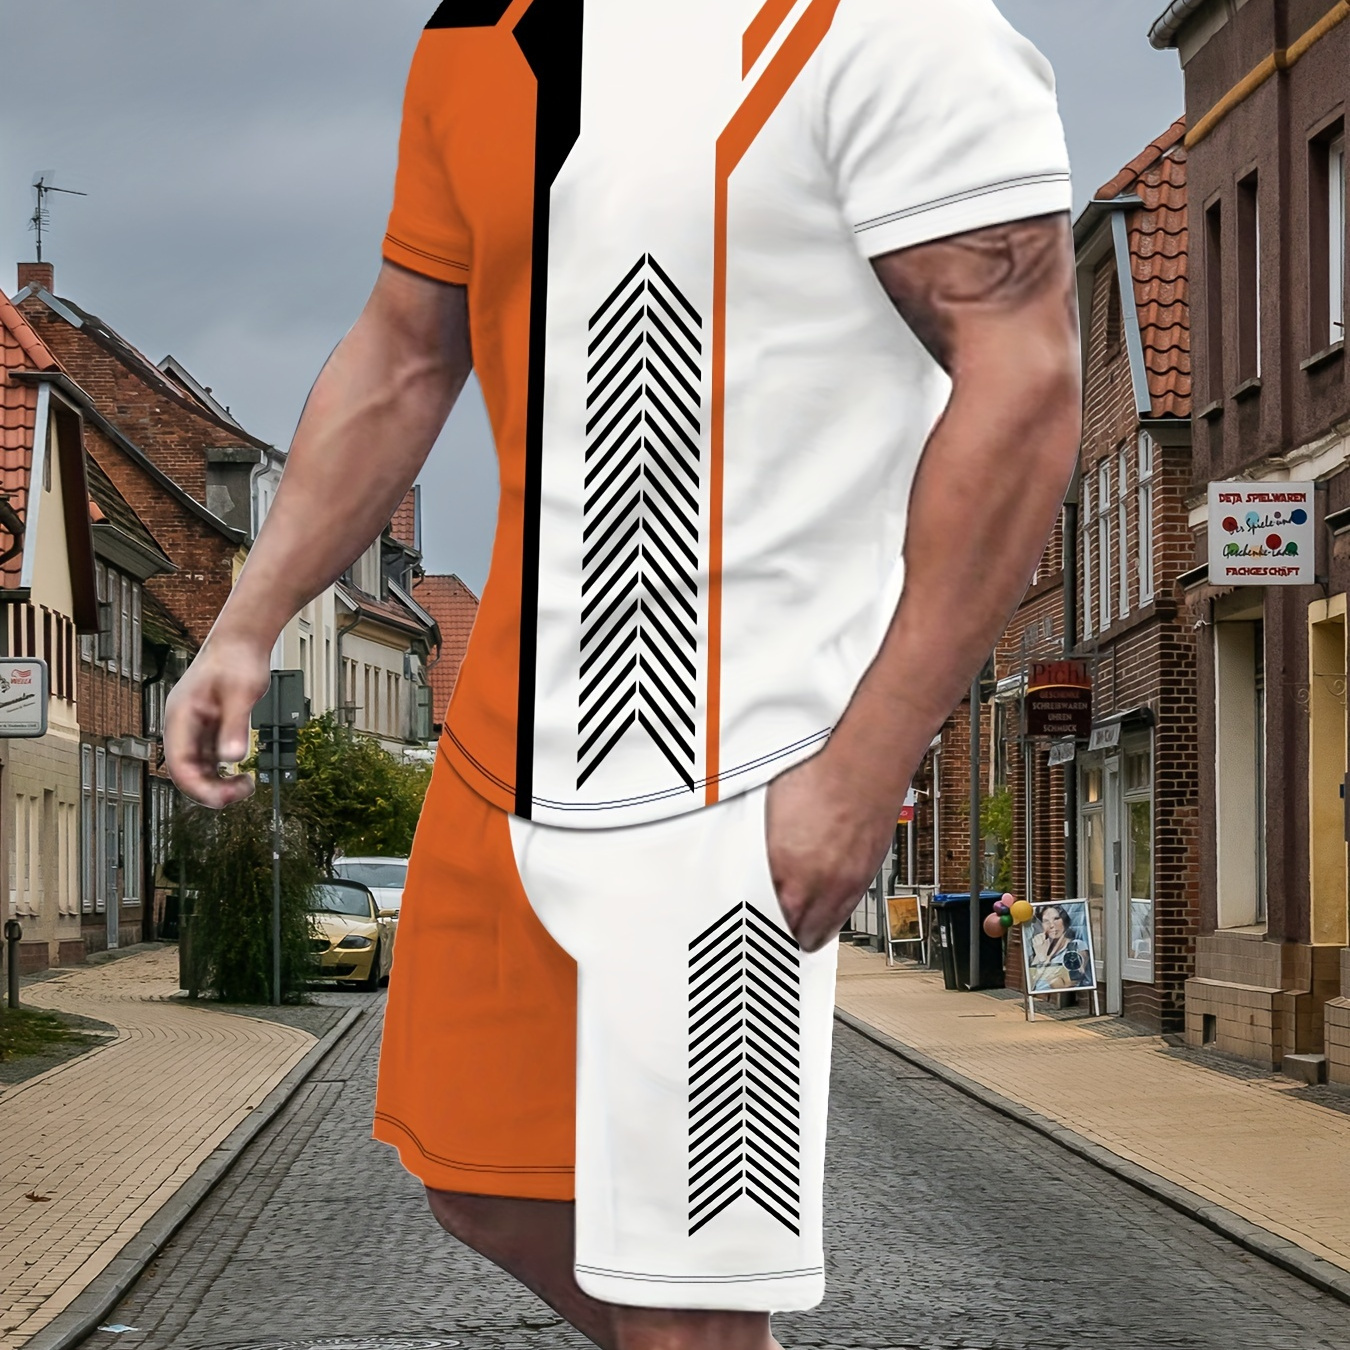 

Men's Outfit, Arrows Pattern Casual Crew Neck Short Sleeve T-shirt & Shorts 2-piece Set For Summer Outdoor Activities